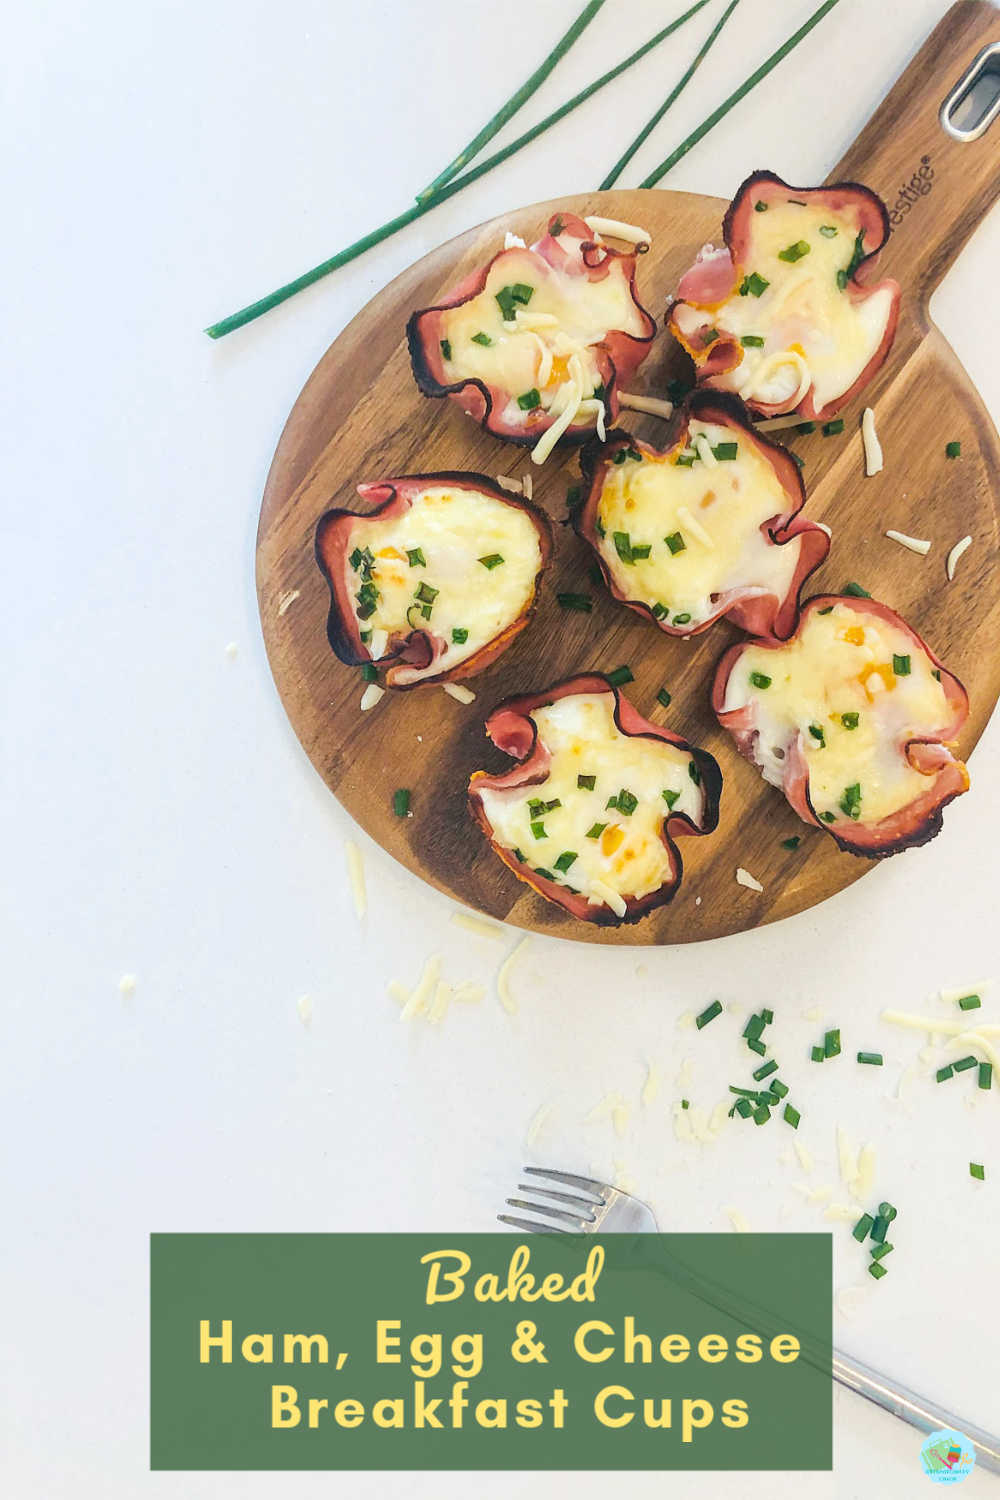 How to make slimming world friendly baked ham and egg breakfast cups sprinkled with cheese and chives